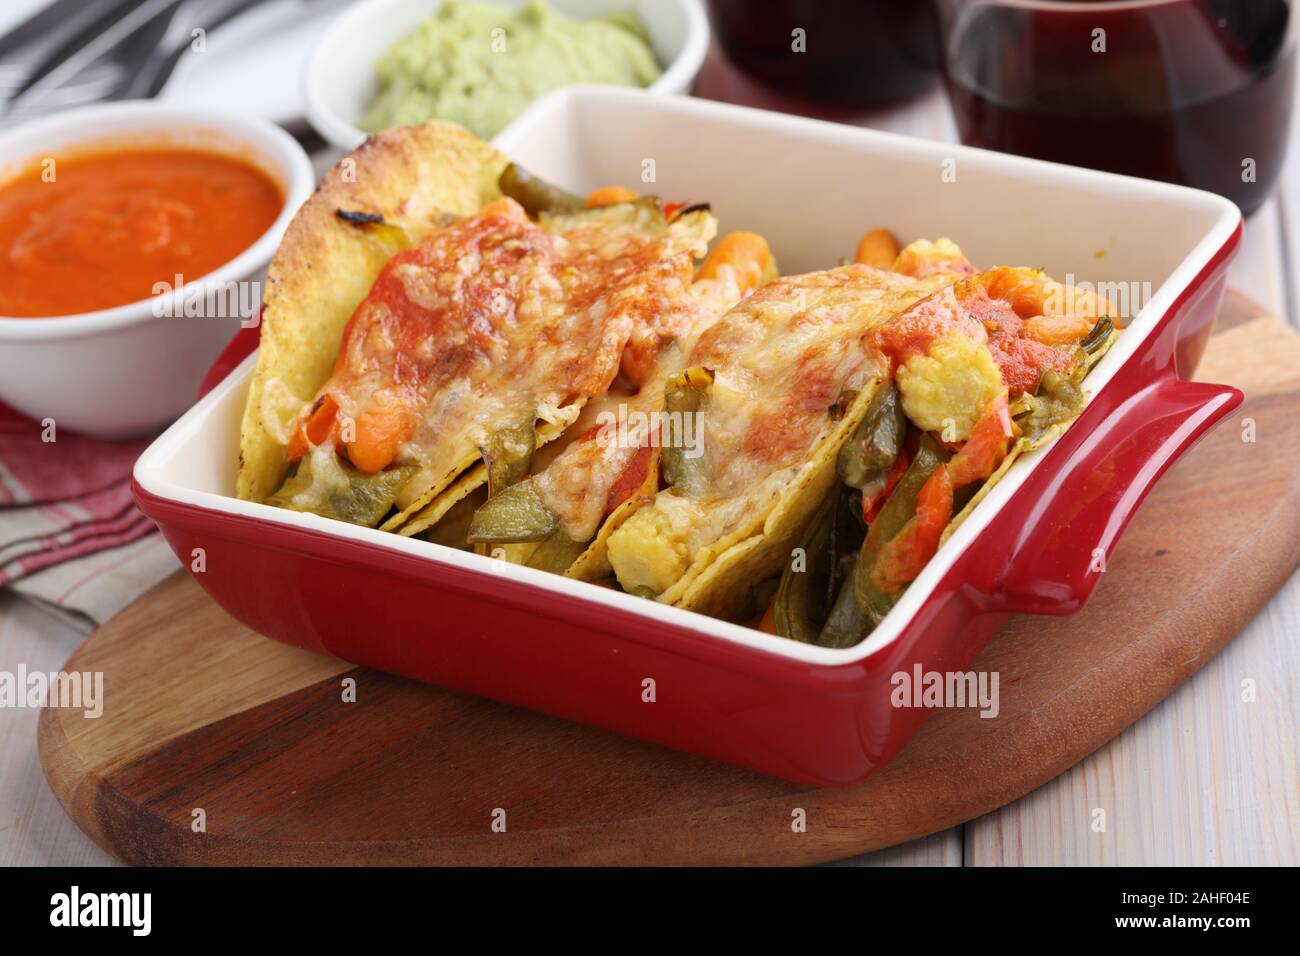 Vegetarian tacos with cheese, guacamole, salsa, and red wine on a rustic table Stock Photo